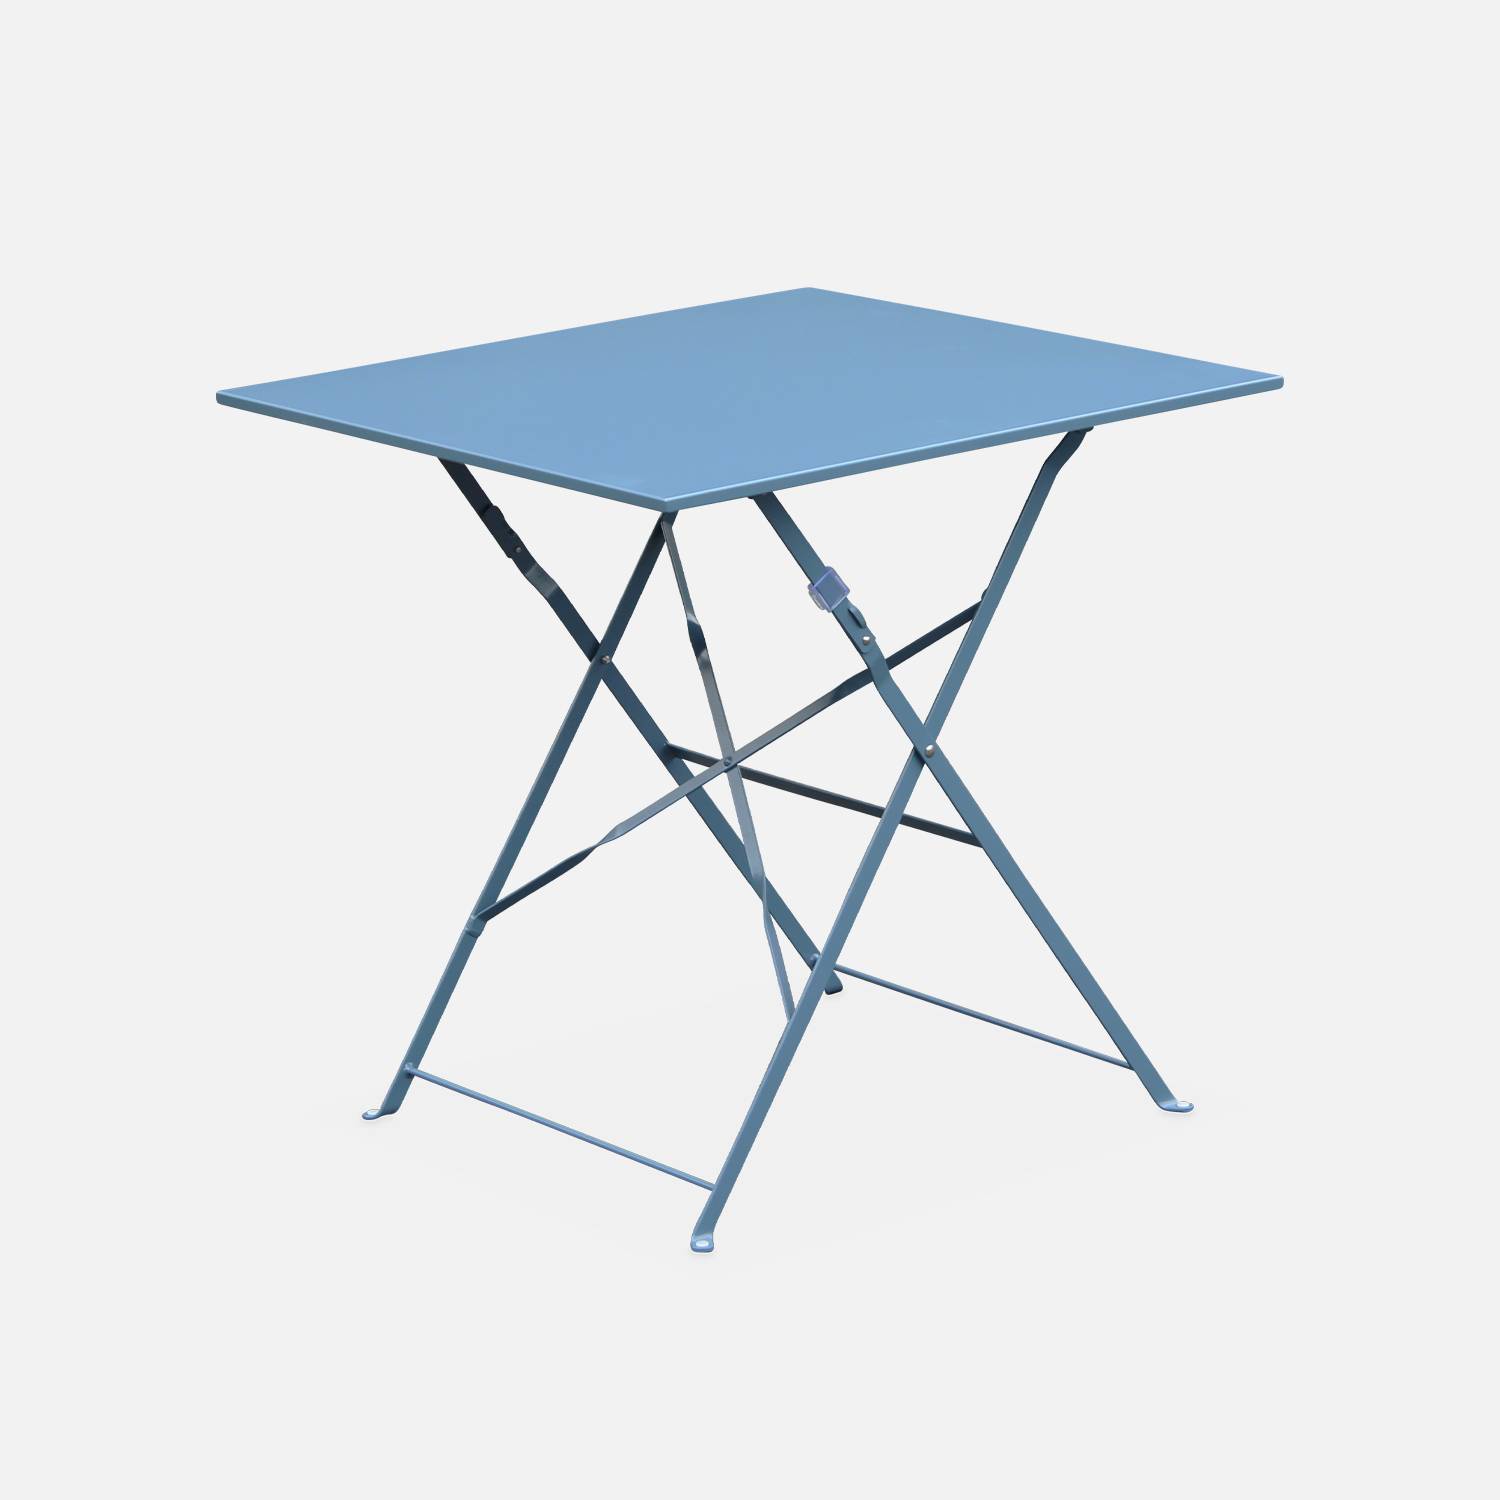 2-seater foldable thermo-lacquered steel bistro garden table, 70x70cm - Blue grey | sweeek